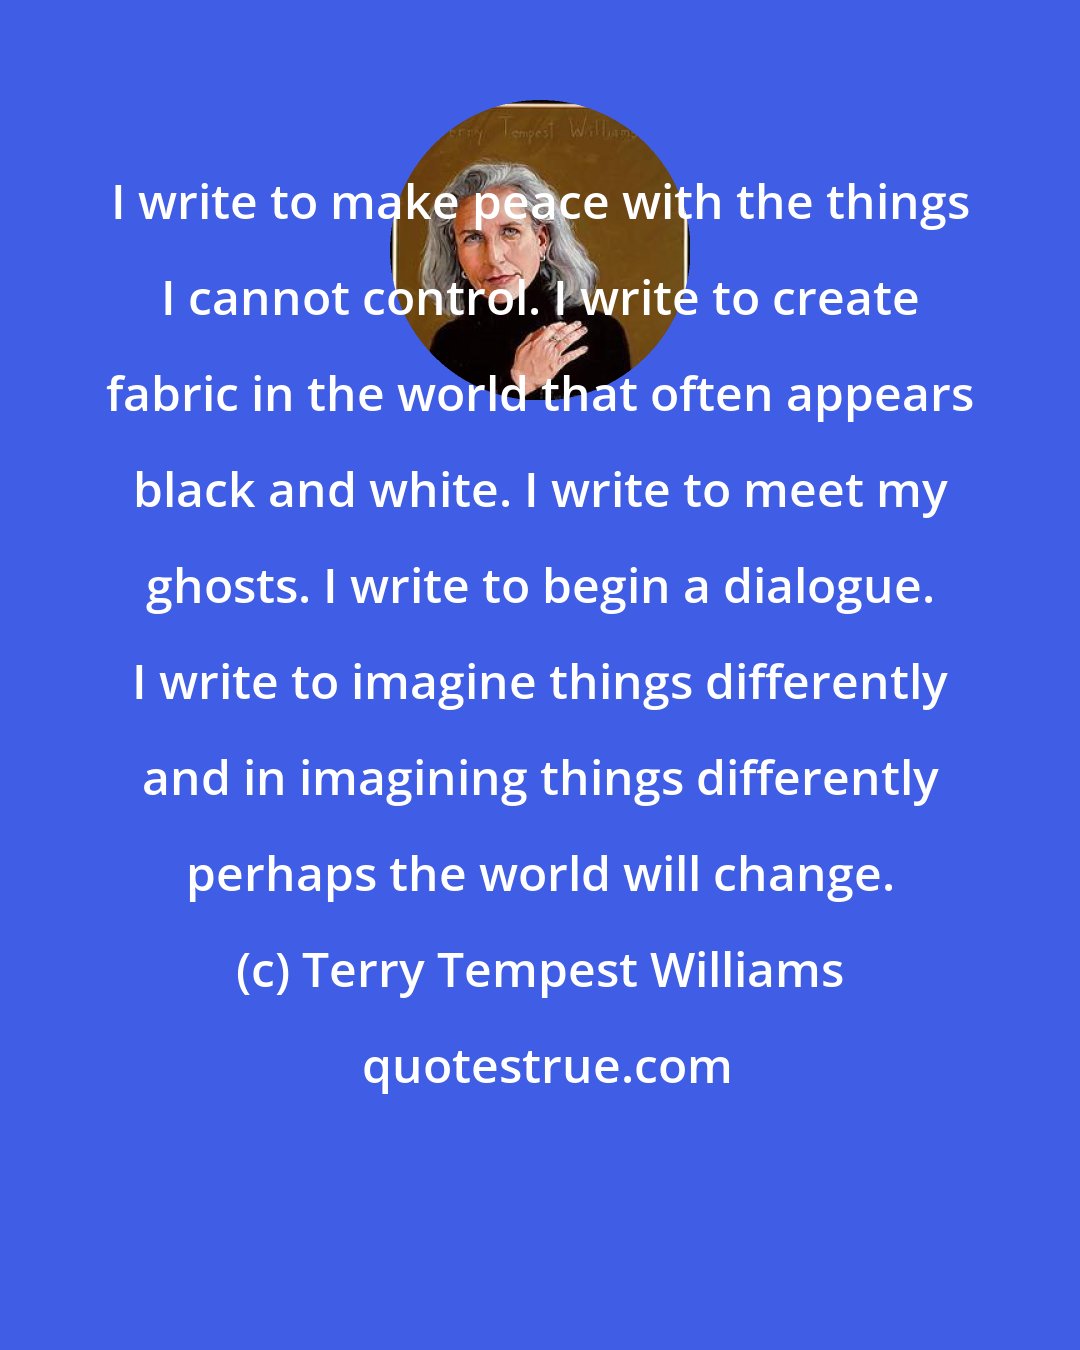 Terry Tempest Williams: I write to make peace with the things I cannot control. I write to create fabric in the world that often appears black and white. I write to meet my ghosts. I write to begin a dialogue. I write to imagine things differently and in imagining things differently perhaps the world will change.